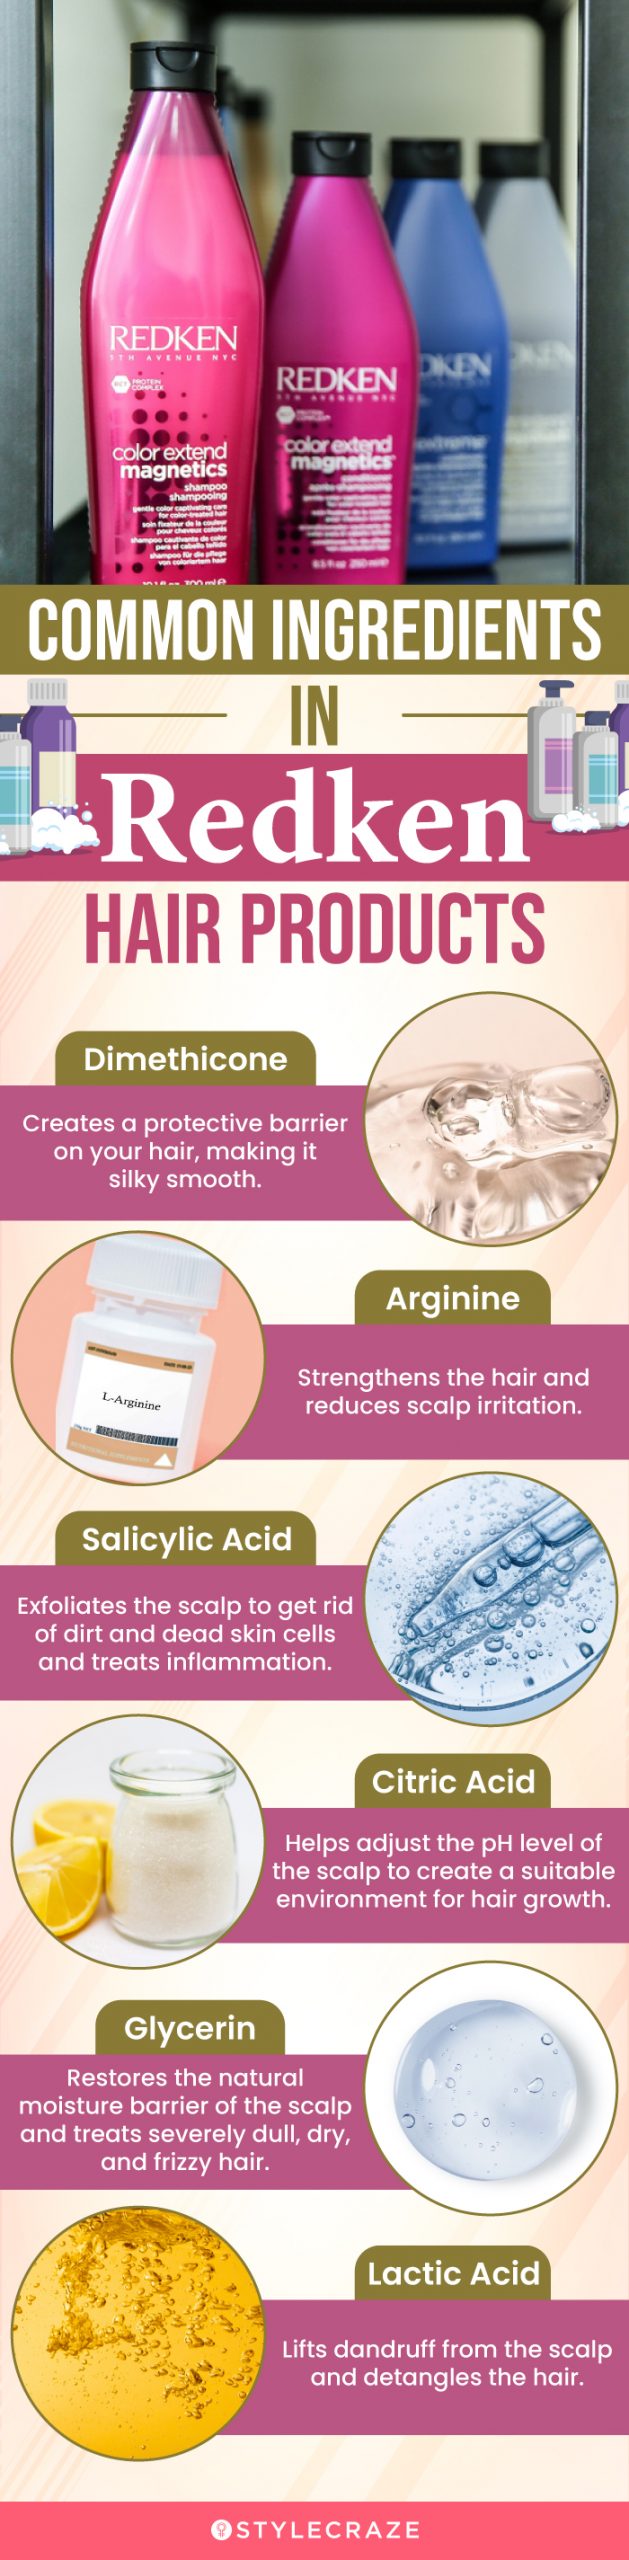 Common Ingredients In Redken Hair Products (infographic)